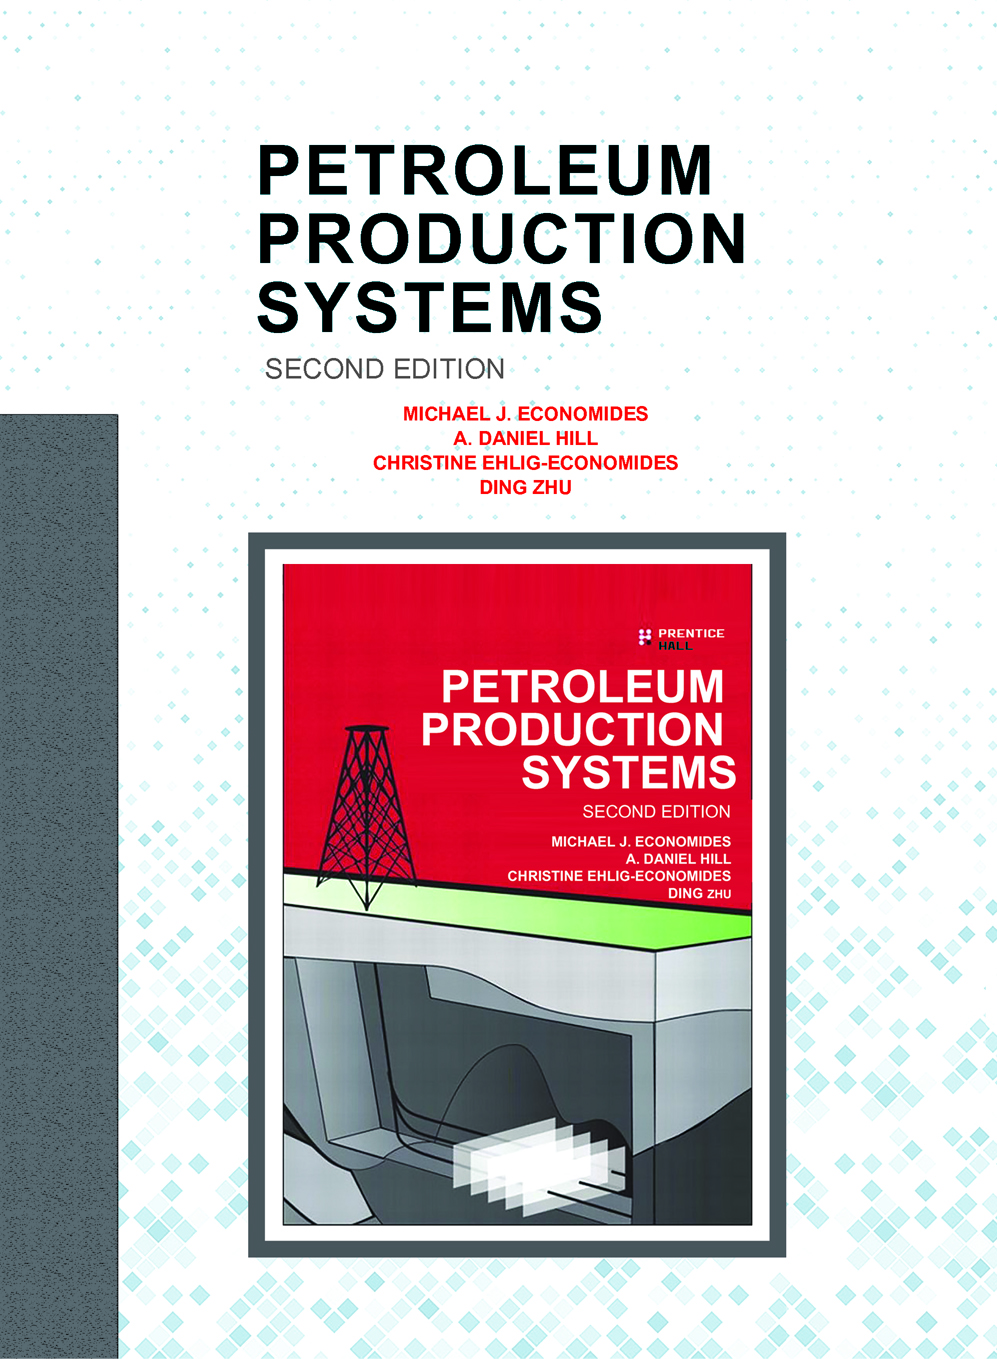 PETROLEUM PRODUCTION SYSTEMS - Second Edition